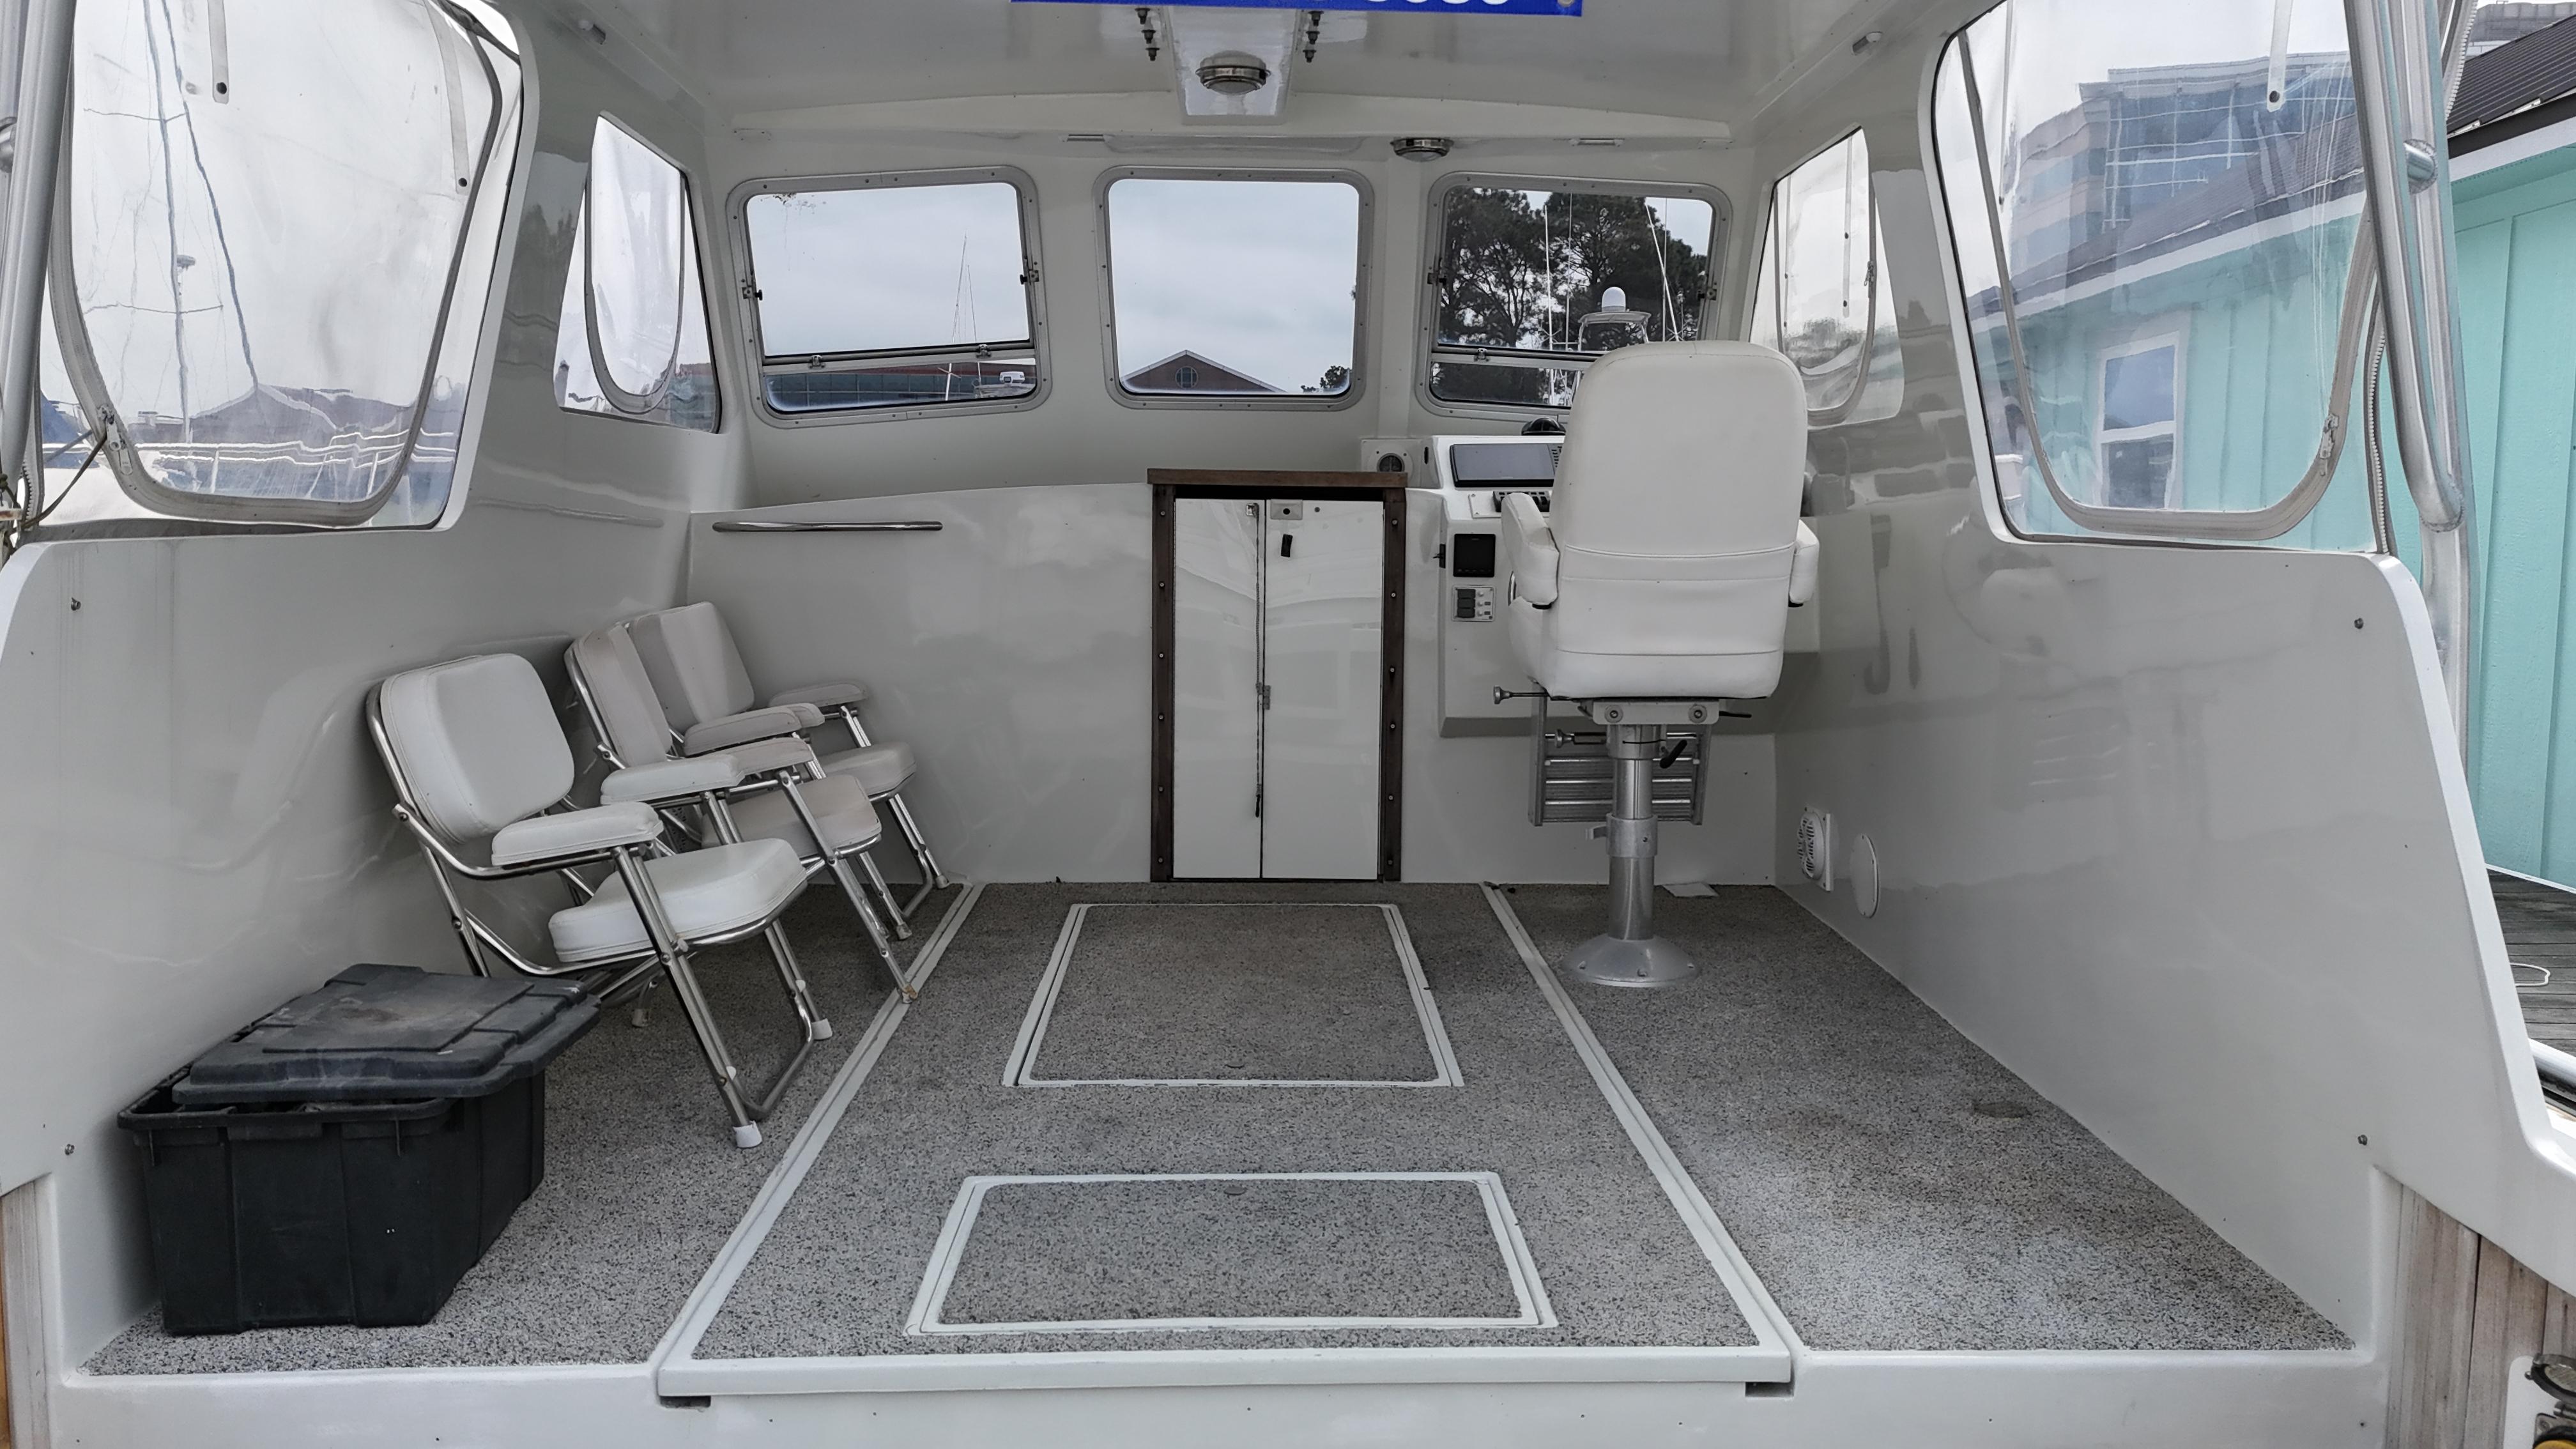 Center Console Enclosure Protectionis it Enough? - The Hull